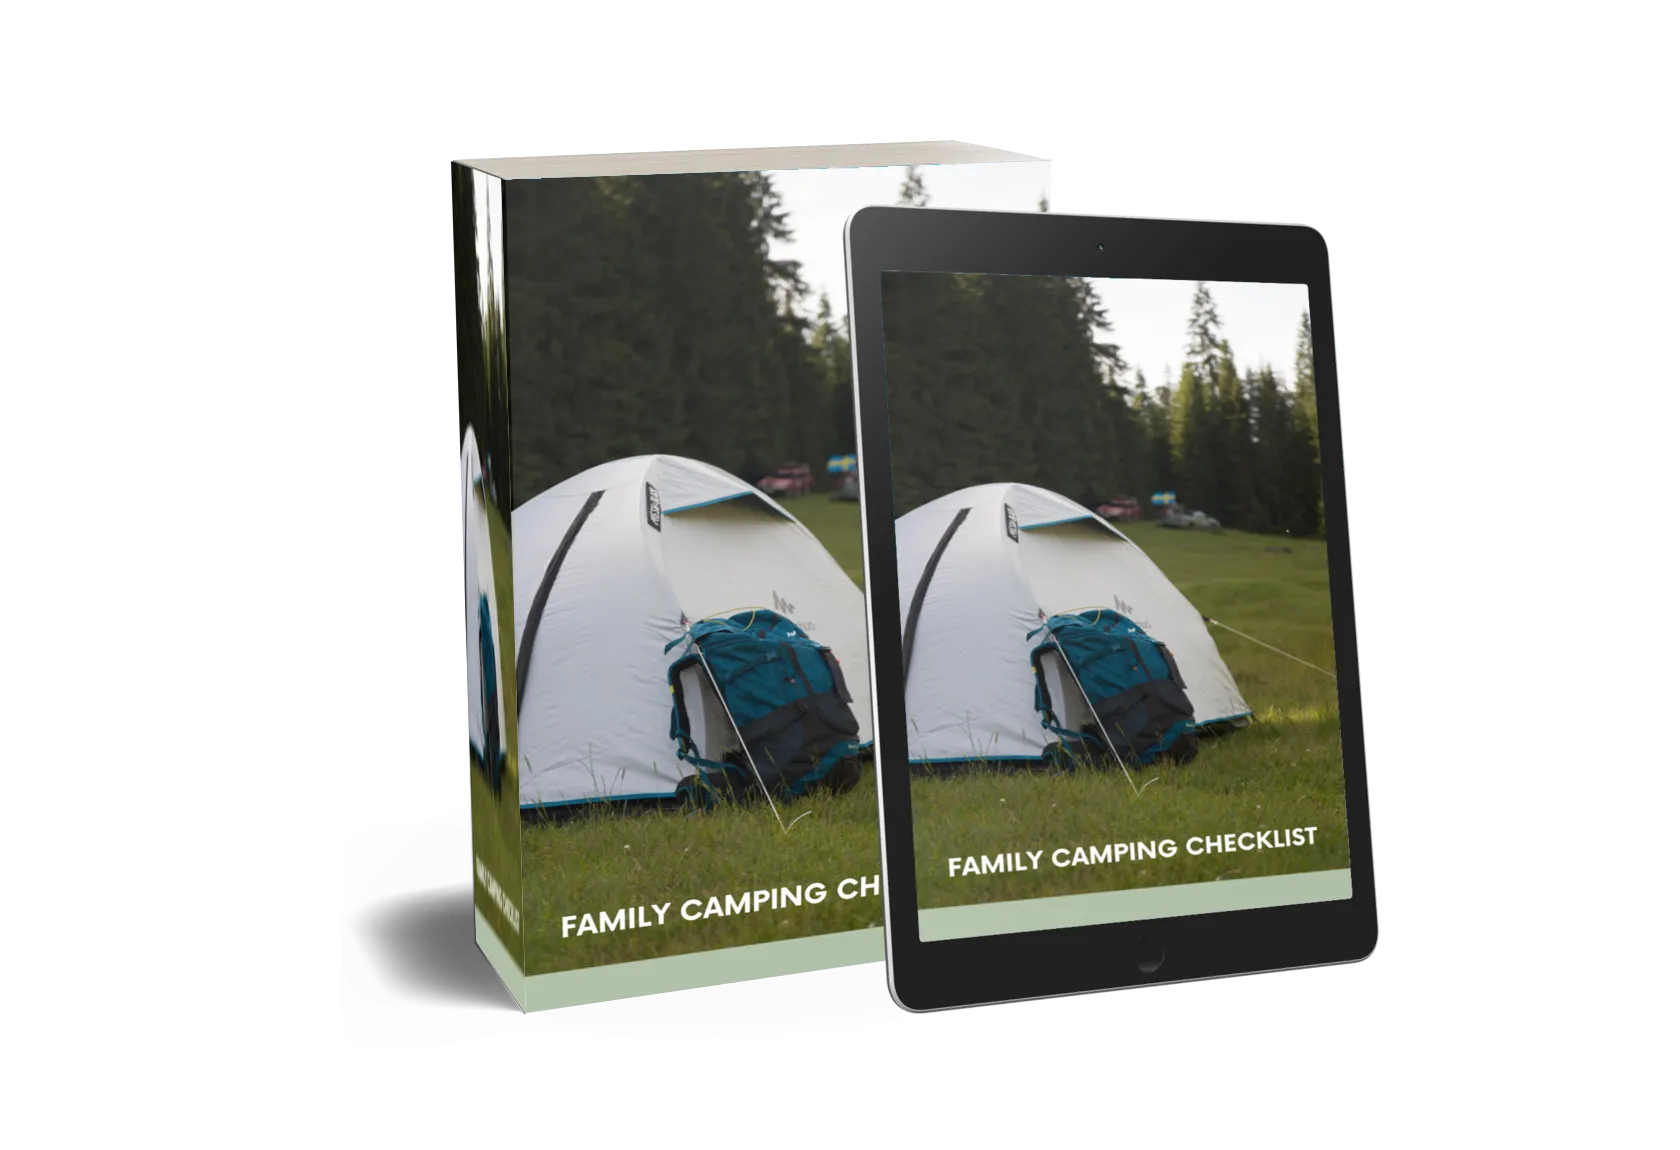 FAMILY CAMPING CHECKLIST